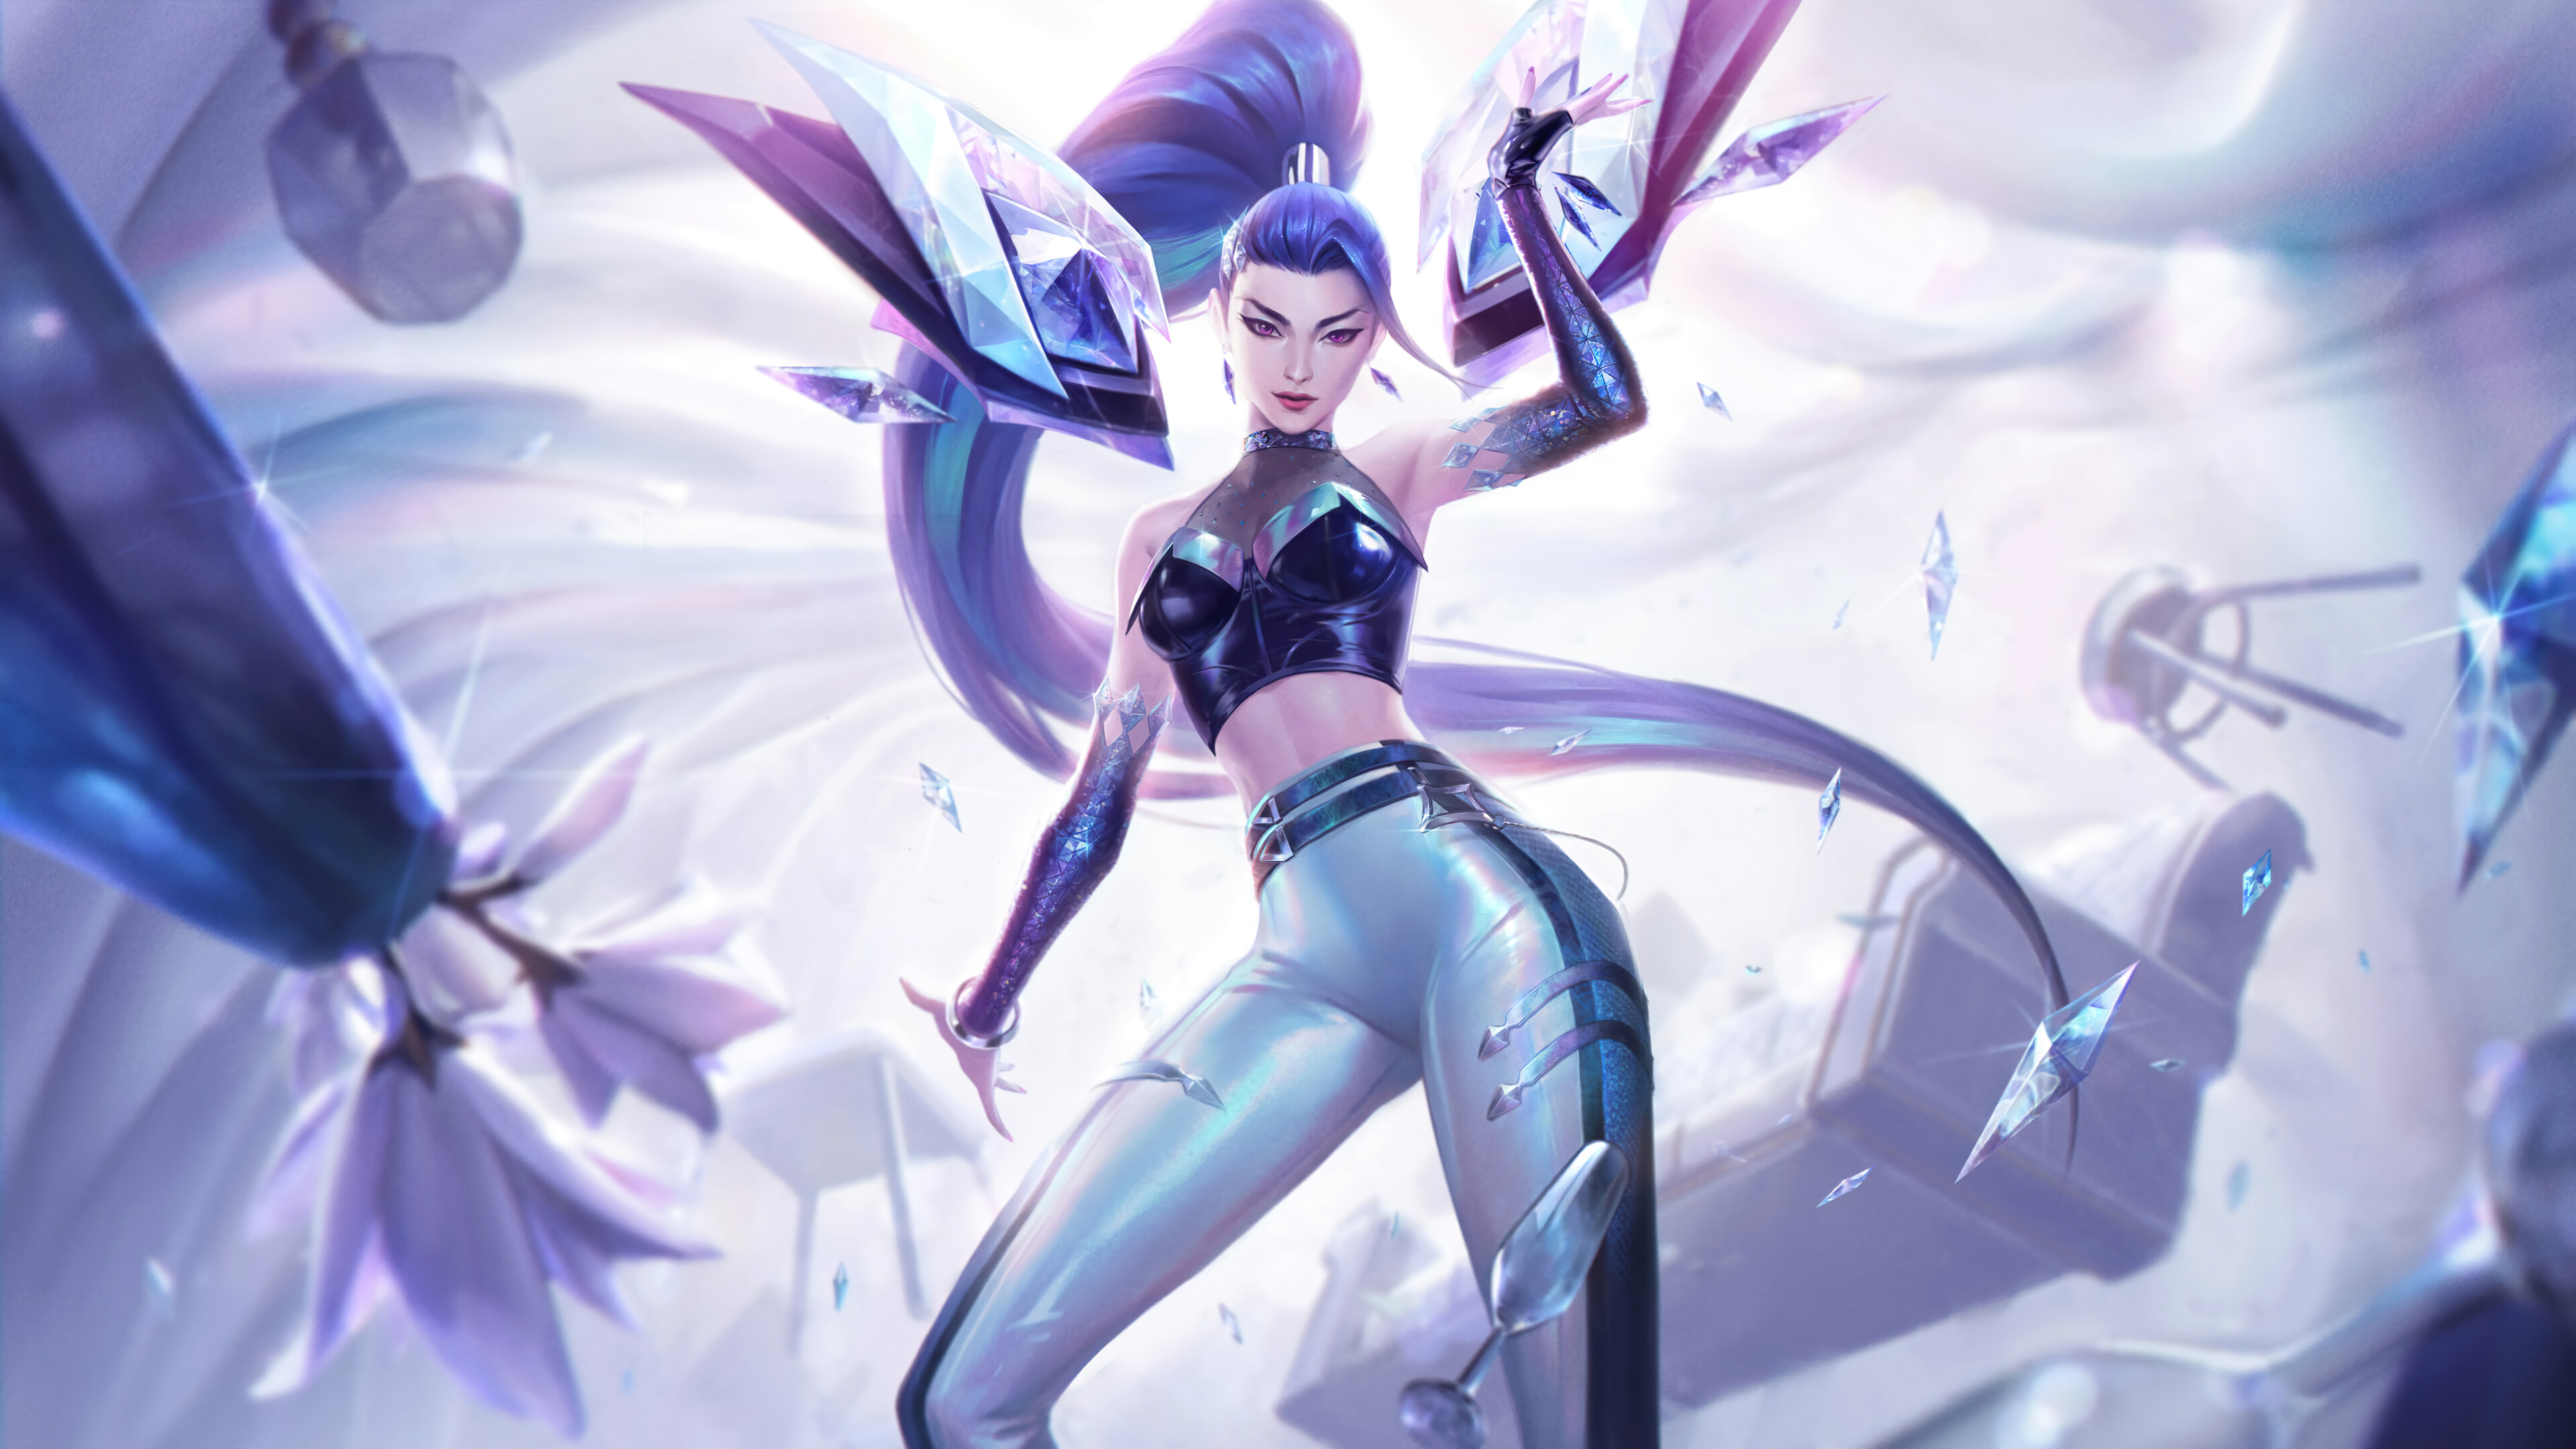 General 3840x2160 Kai'Sa (League of Legends) K/DA Riot Games music Adcarry ADC 4K GZG video game characters